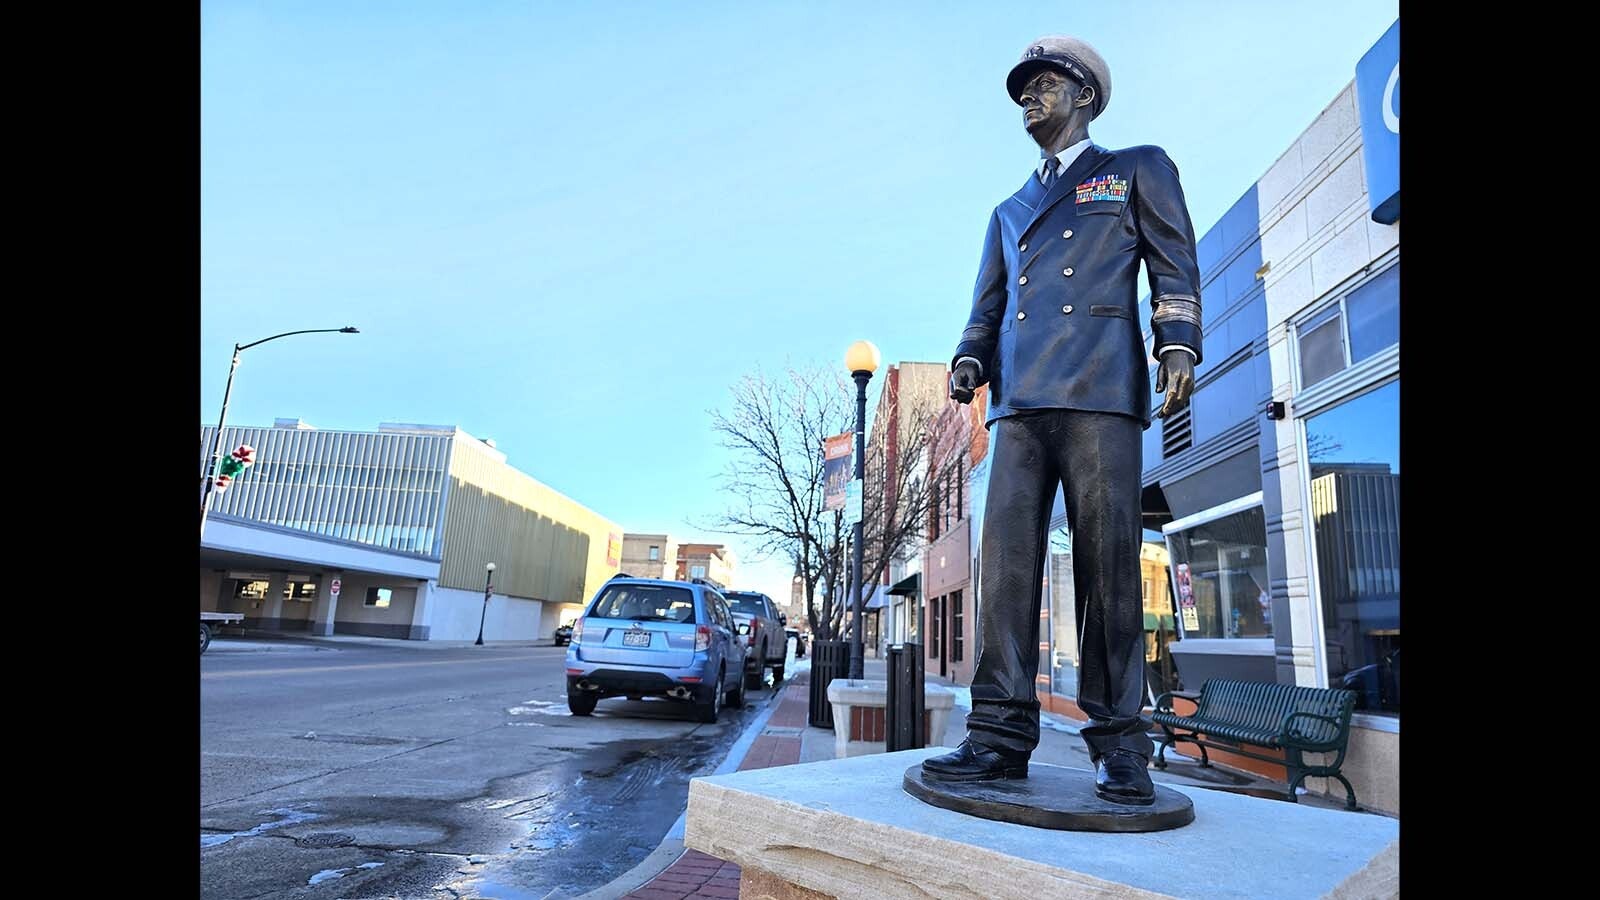 Vice Admiral Francis McInerney perpetually looks out over Cheyenne at the intersection of Capitol Avenue and 18th Street. Winner of the Navy Cross, a Silver Star, a Bronze Star and the Legion of Merit Medal, McInerney had a remarkable military career. The sculptor was Joel Turner and Donors were John T. McInerney and Sara Murphy, along with Diane and Daniel E. White, Catherine and Edward F. Murray III.